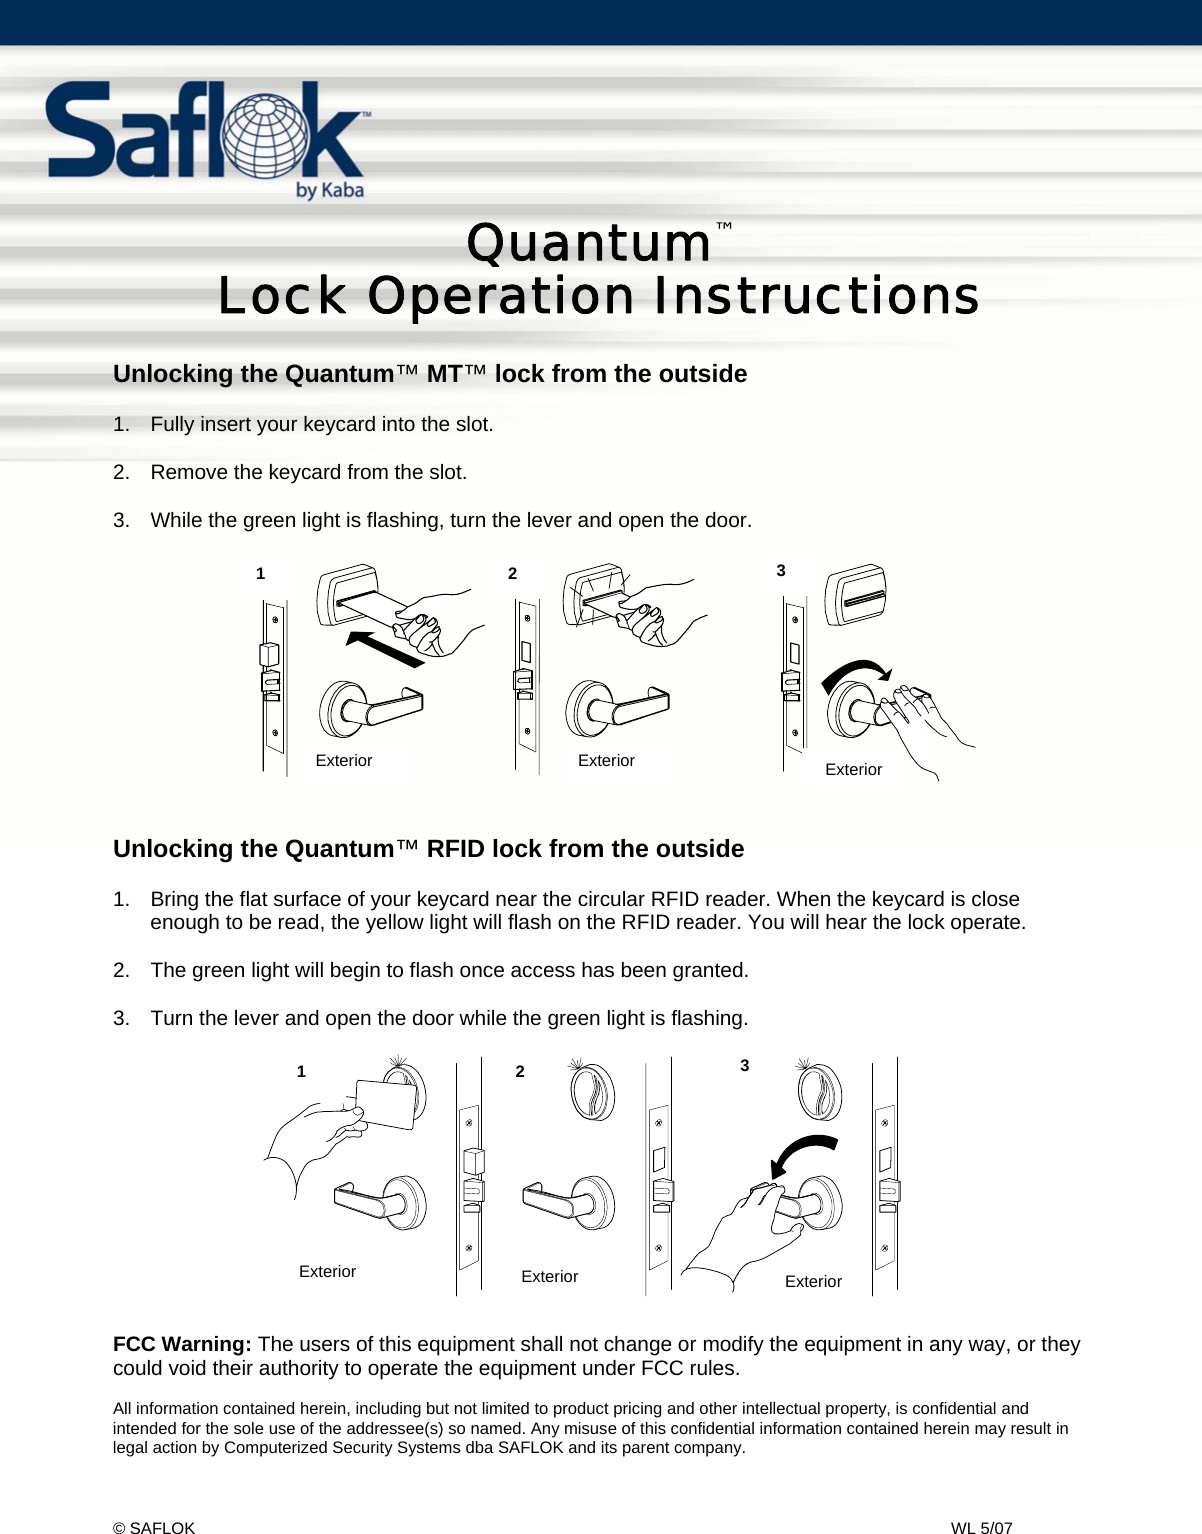 Quantum™ Lock Usage Instructions    Pg. 1 of 2 © SAFLOK    WL 5/07   Quantum™  Lock Operation Instructions  Unlocking the Quantum™ MT™ lock from the outside  1.  Fully insert your keycard into the slot.  2.  Remove the keycard from the slot.  3.  While the green light is flashing, turn the lever and open the door.            Unlocking the Quantum™ RFID lock from the outside  1.  Bring the flat surface of your keycard near the circular RFID reader. When the keycard is close enough to be read, the yellow light will flash on the RFID reader. You will hear the lock operate.   2.  The green light will begin to flash once access has been granted.  3.  Turn the lever and open the door while the green light is flashing.                FCC Warning: The users of this equipment shall not change or modify the equipment in any way, or they could void their authority to operate the equipment under FCC rules.  All information contained herein, including but not limited to product pricing and other intellectual property, is confidential and intended for the sole use of the addressee(s) so named. Any misuse of this confidential information contained herein may result in legal action by Computerized Security Systems dba SAFLOK and its parent company. 1 2 3Ex t er i or Ext er i or Ext er i or231Exterior  Exterior  Exterior ExteriorExteriorExterior 1  2   3 1   2  3 